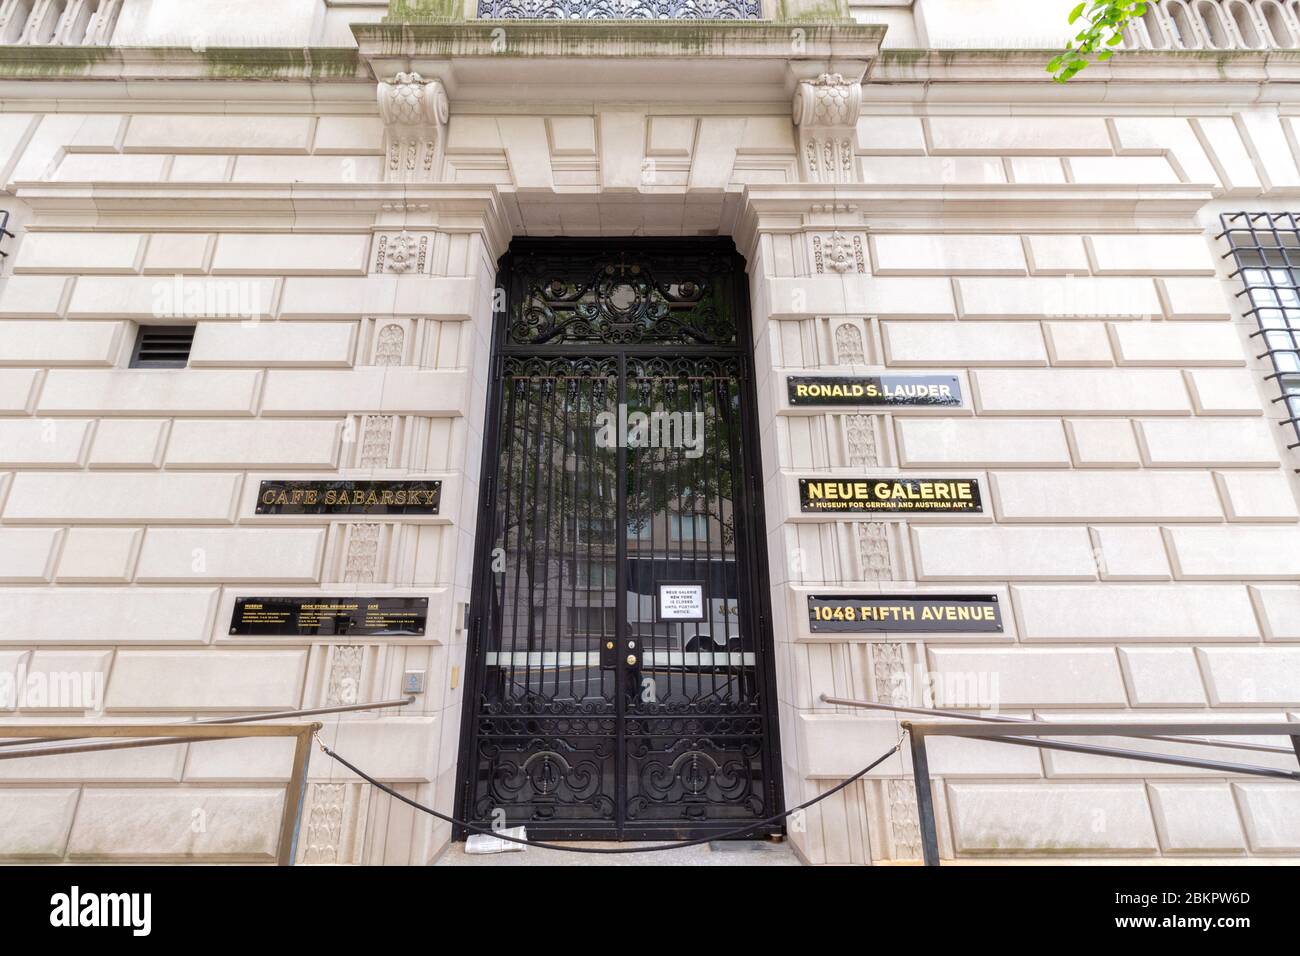 entrance to the Neue Galerie for German and Austrian Art. Established in 2001, it exhibits early twentieth century German and Austrian art and design. Stock Photo